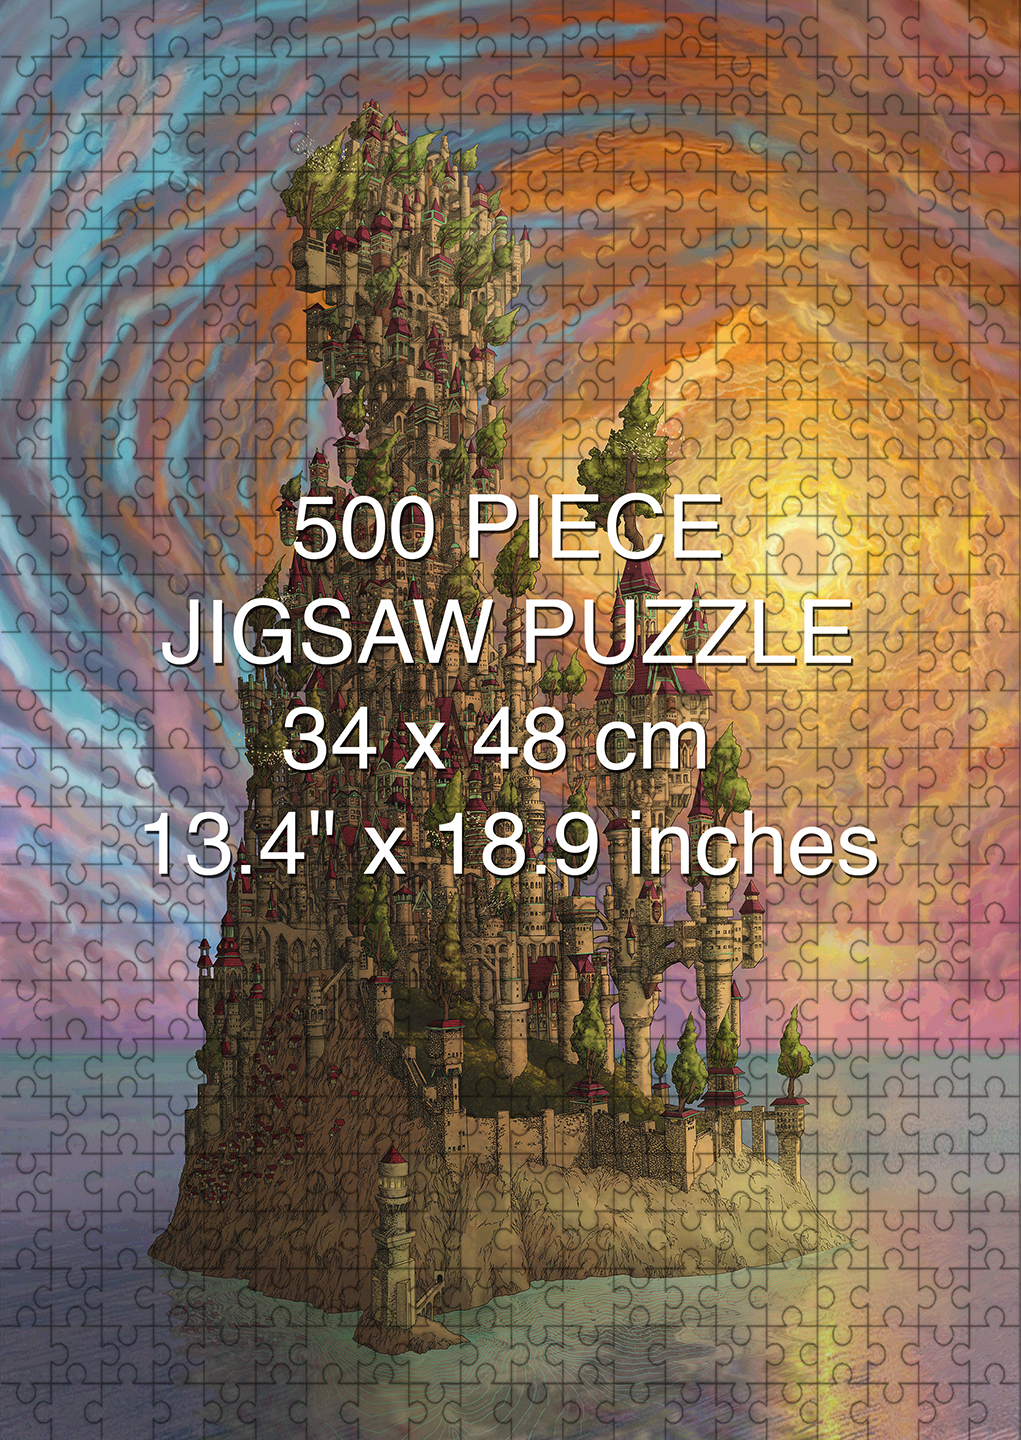 A Delicate Balance: The Kingdom 500 piece puzzle by Aaron Wolf and Pandemic Puzzles